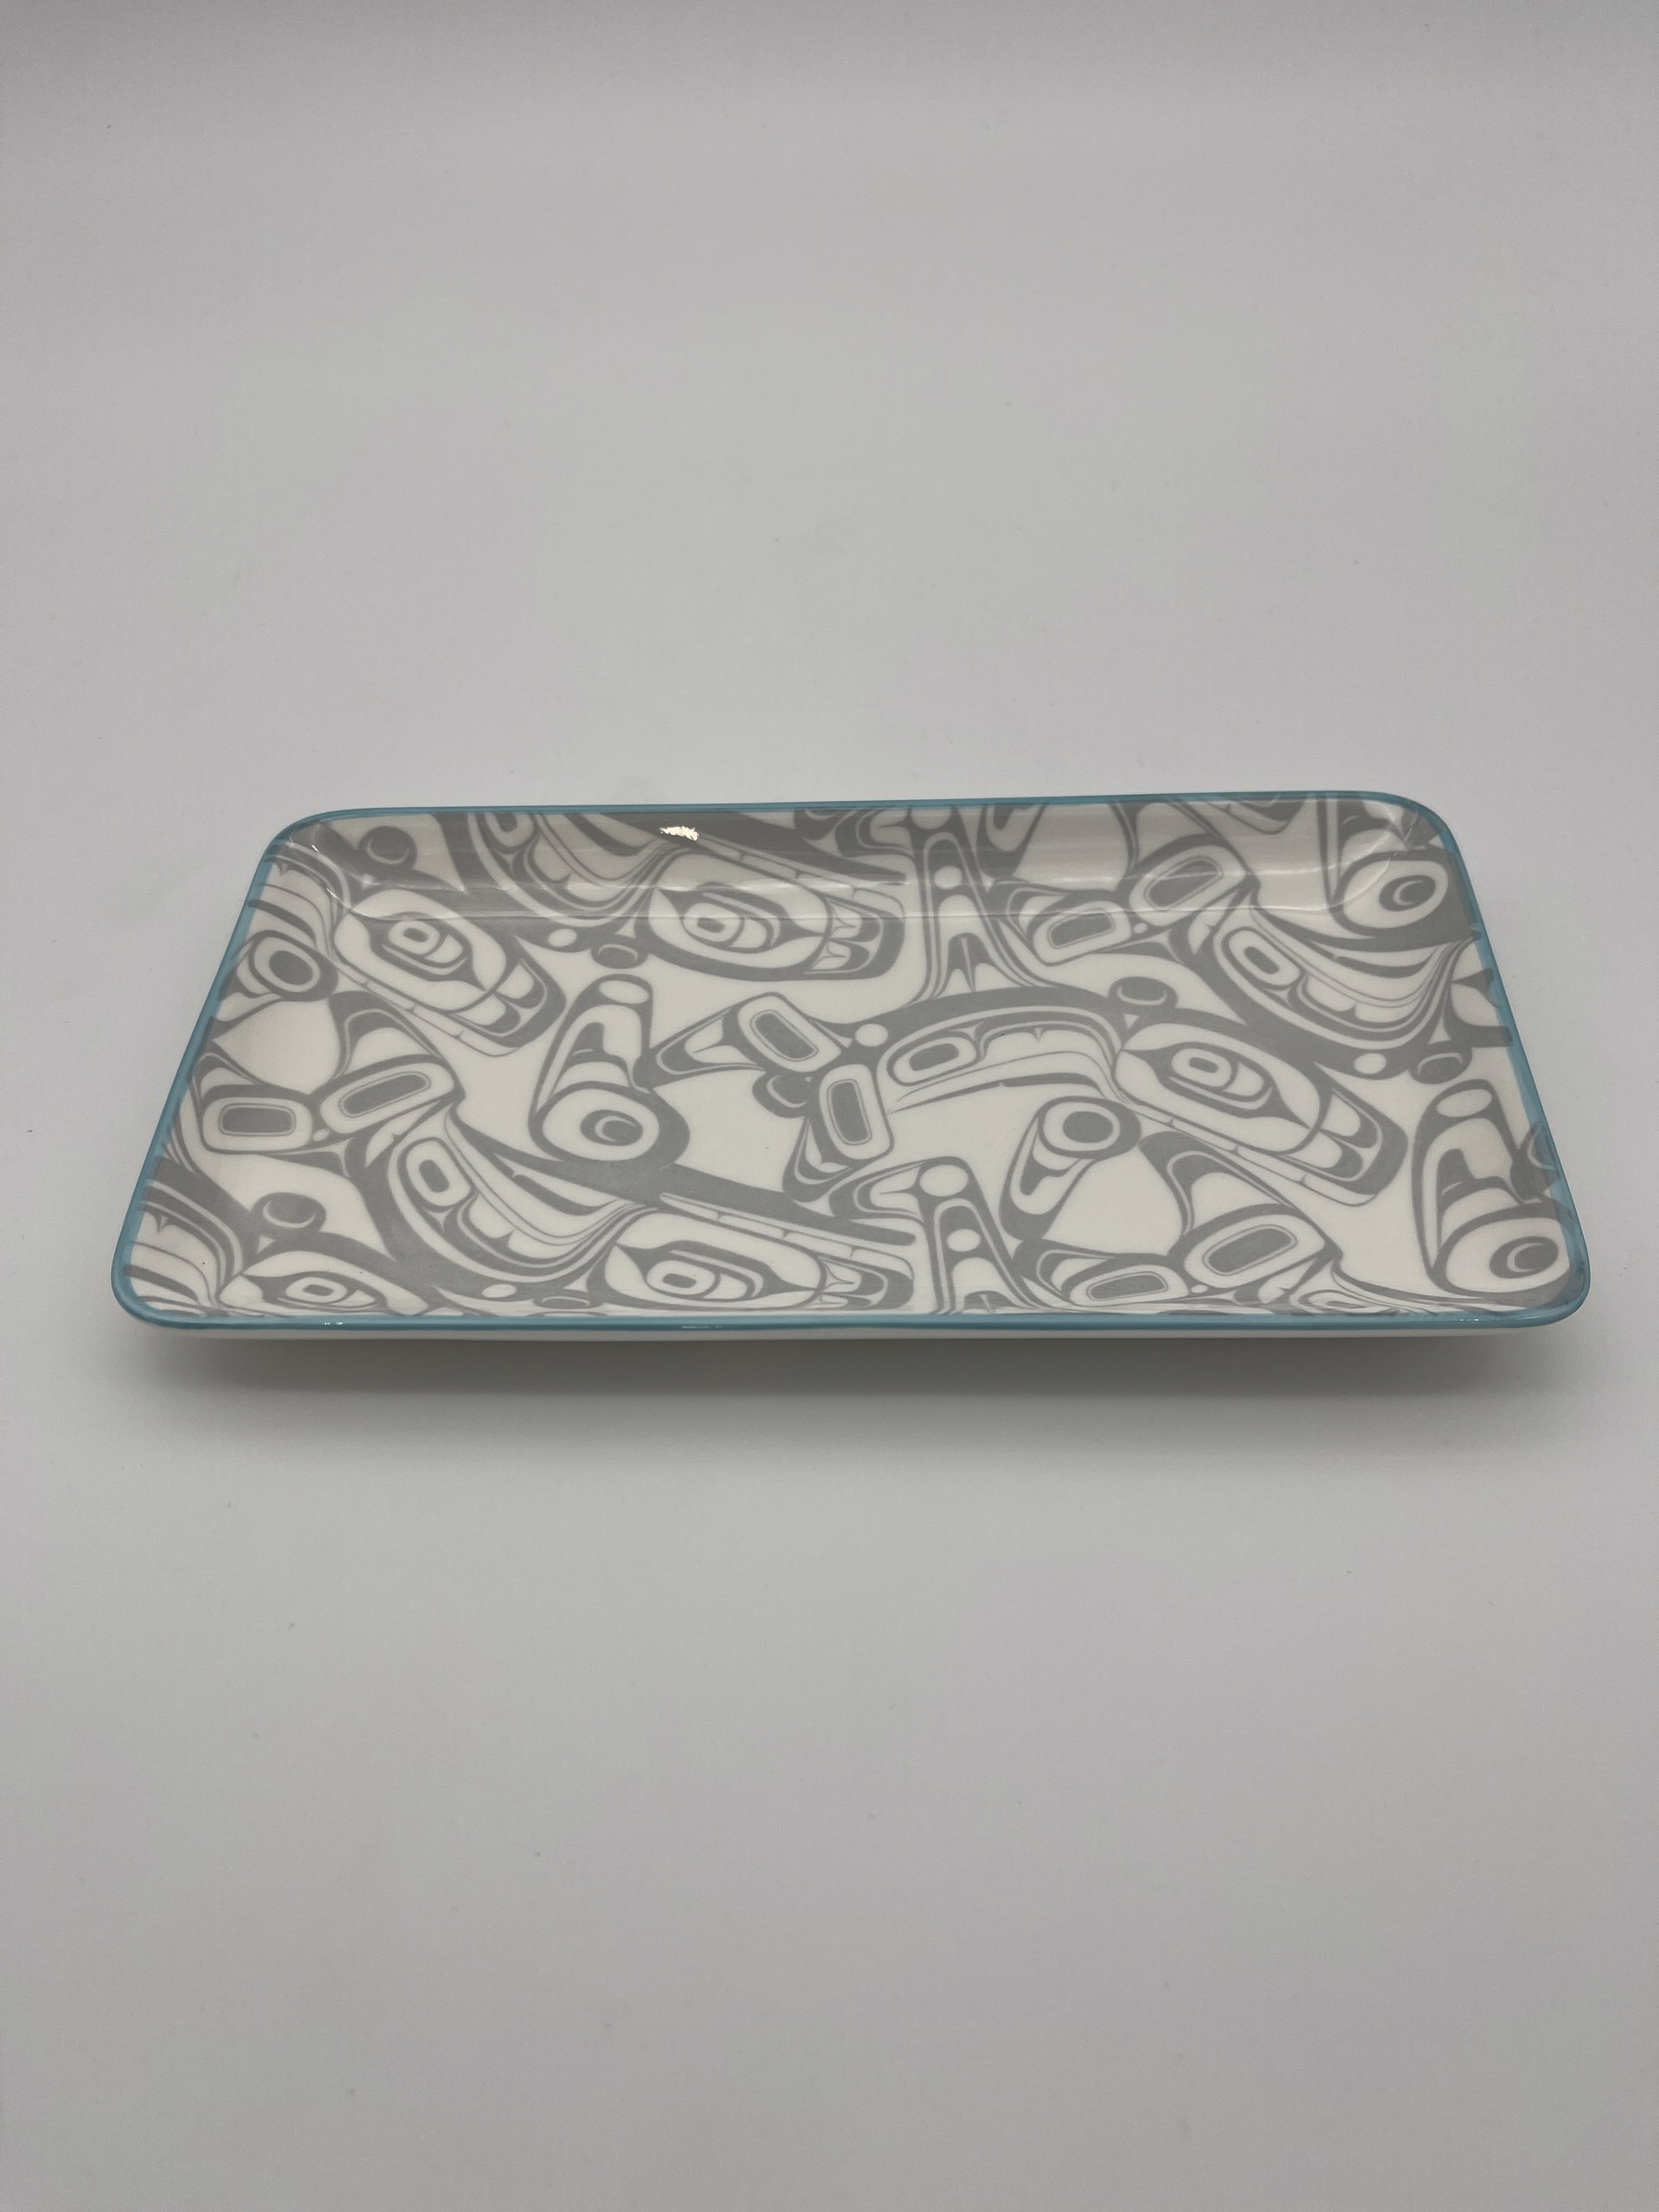 Orca platter Turquoise/Grey by Kelly Robinson